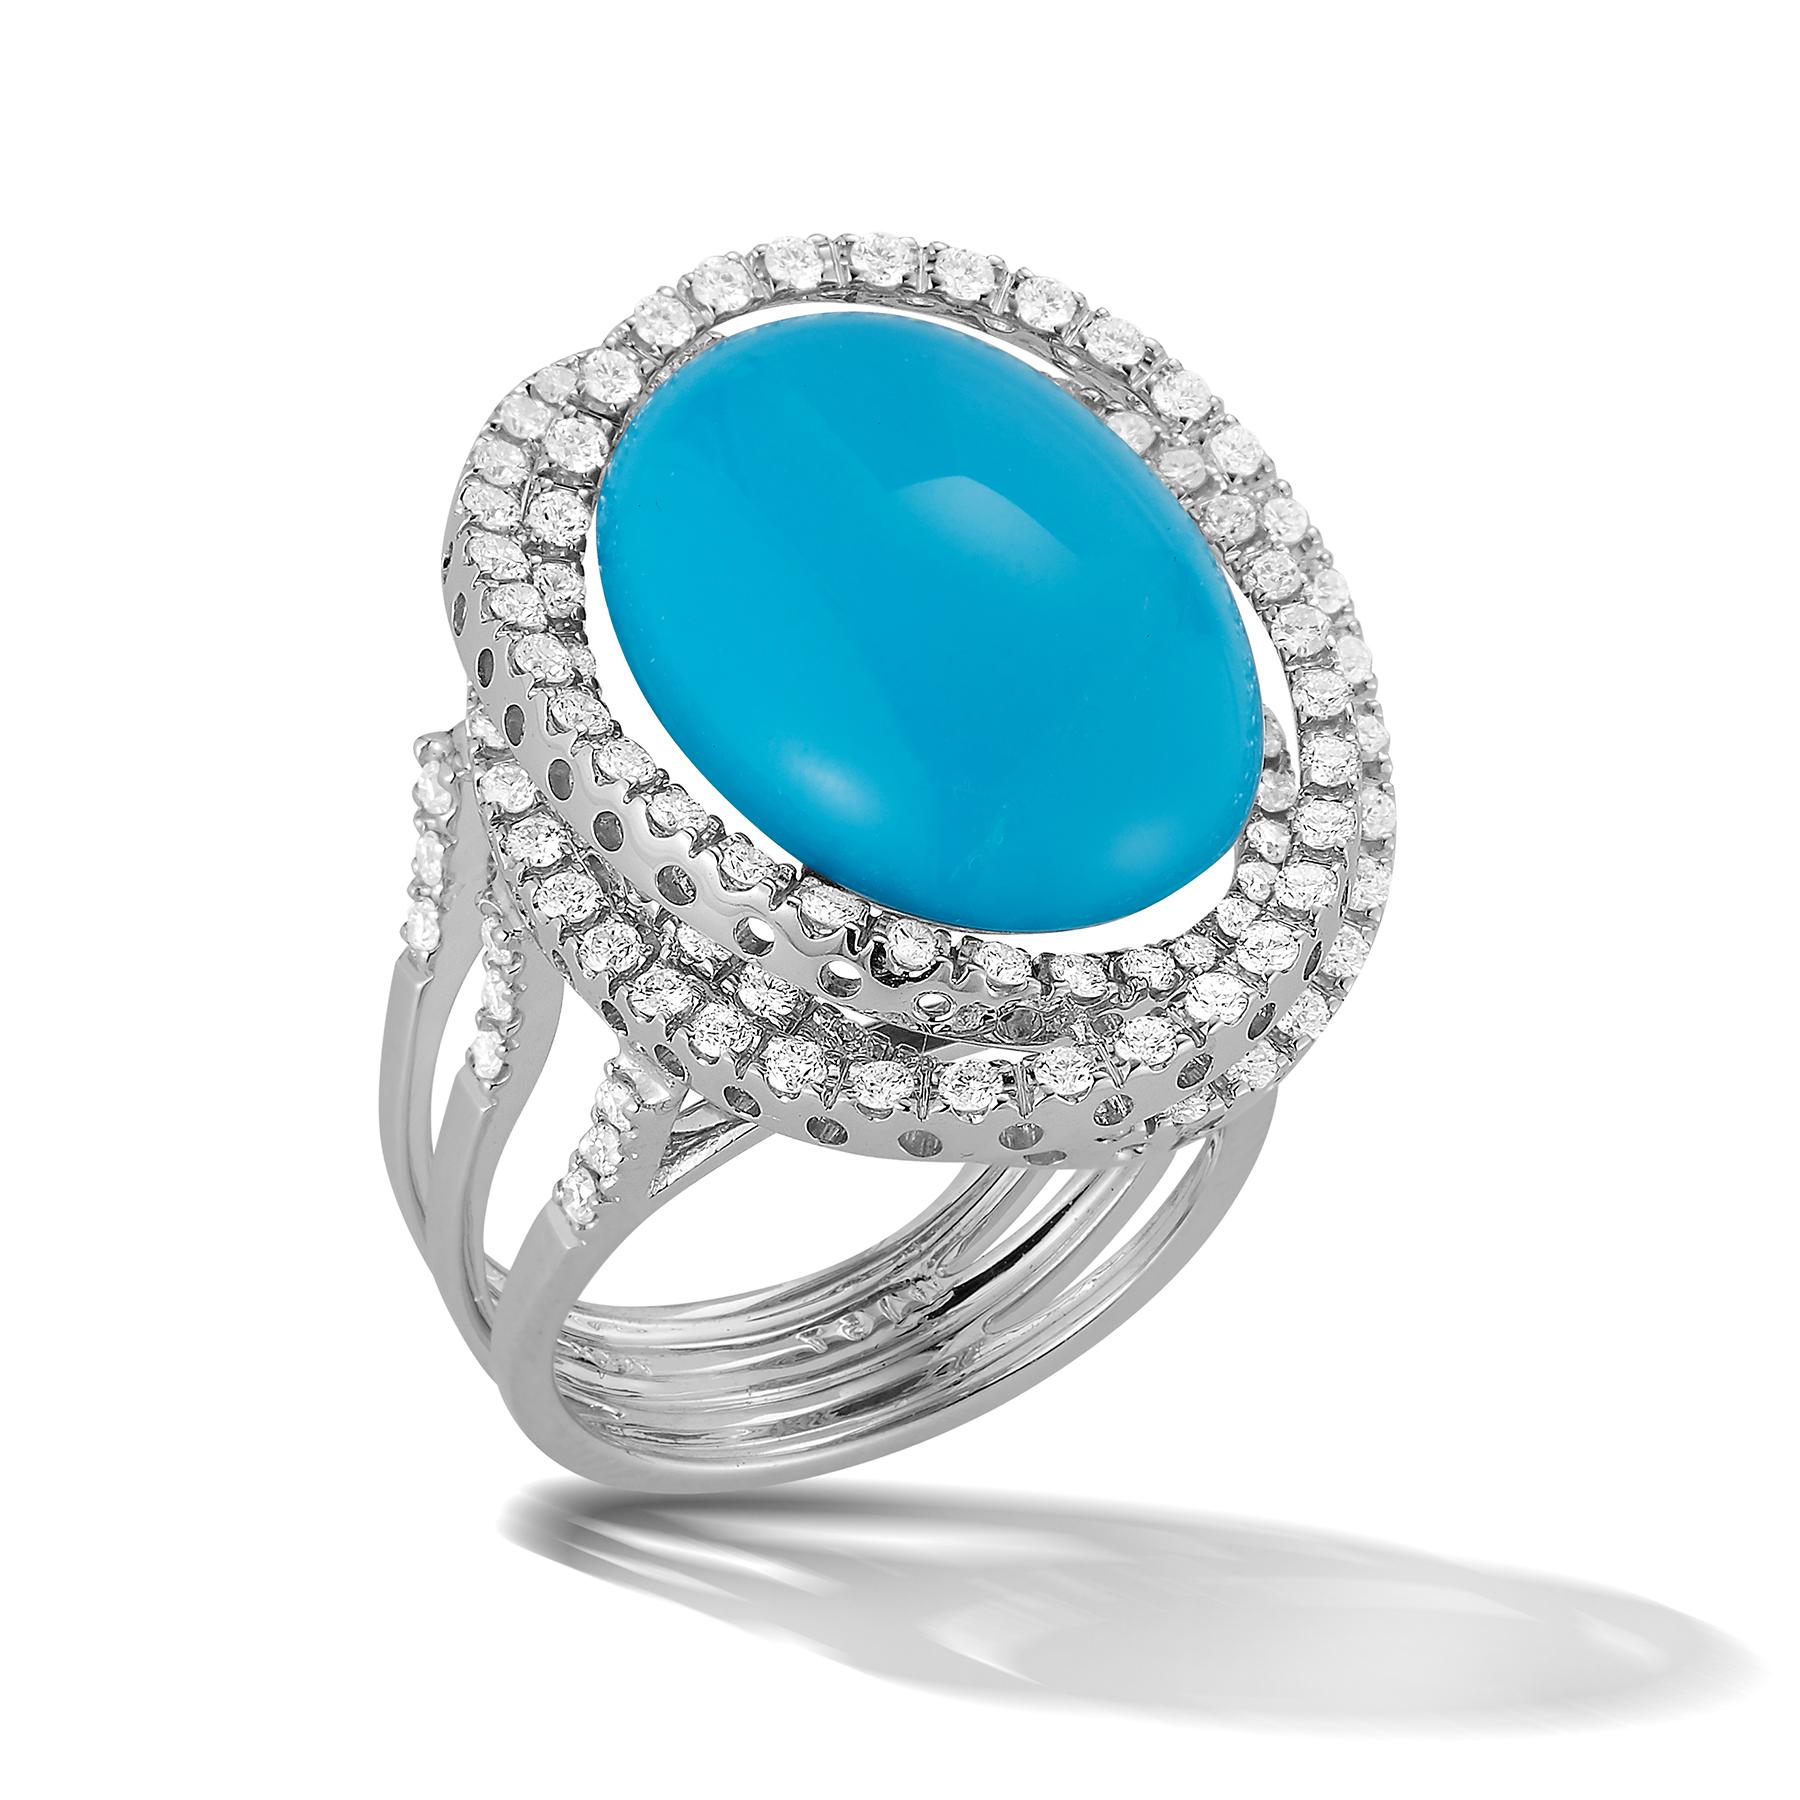 Beautiful 18K White Gold Ring with Impressive 12.54 Carat Aquamarine Cabochon Stone surrounded by 3 halos of 117 dazzling white round diamonds weighing 1.50 carats.